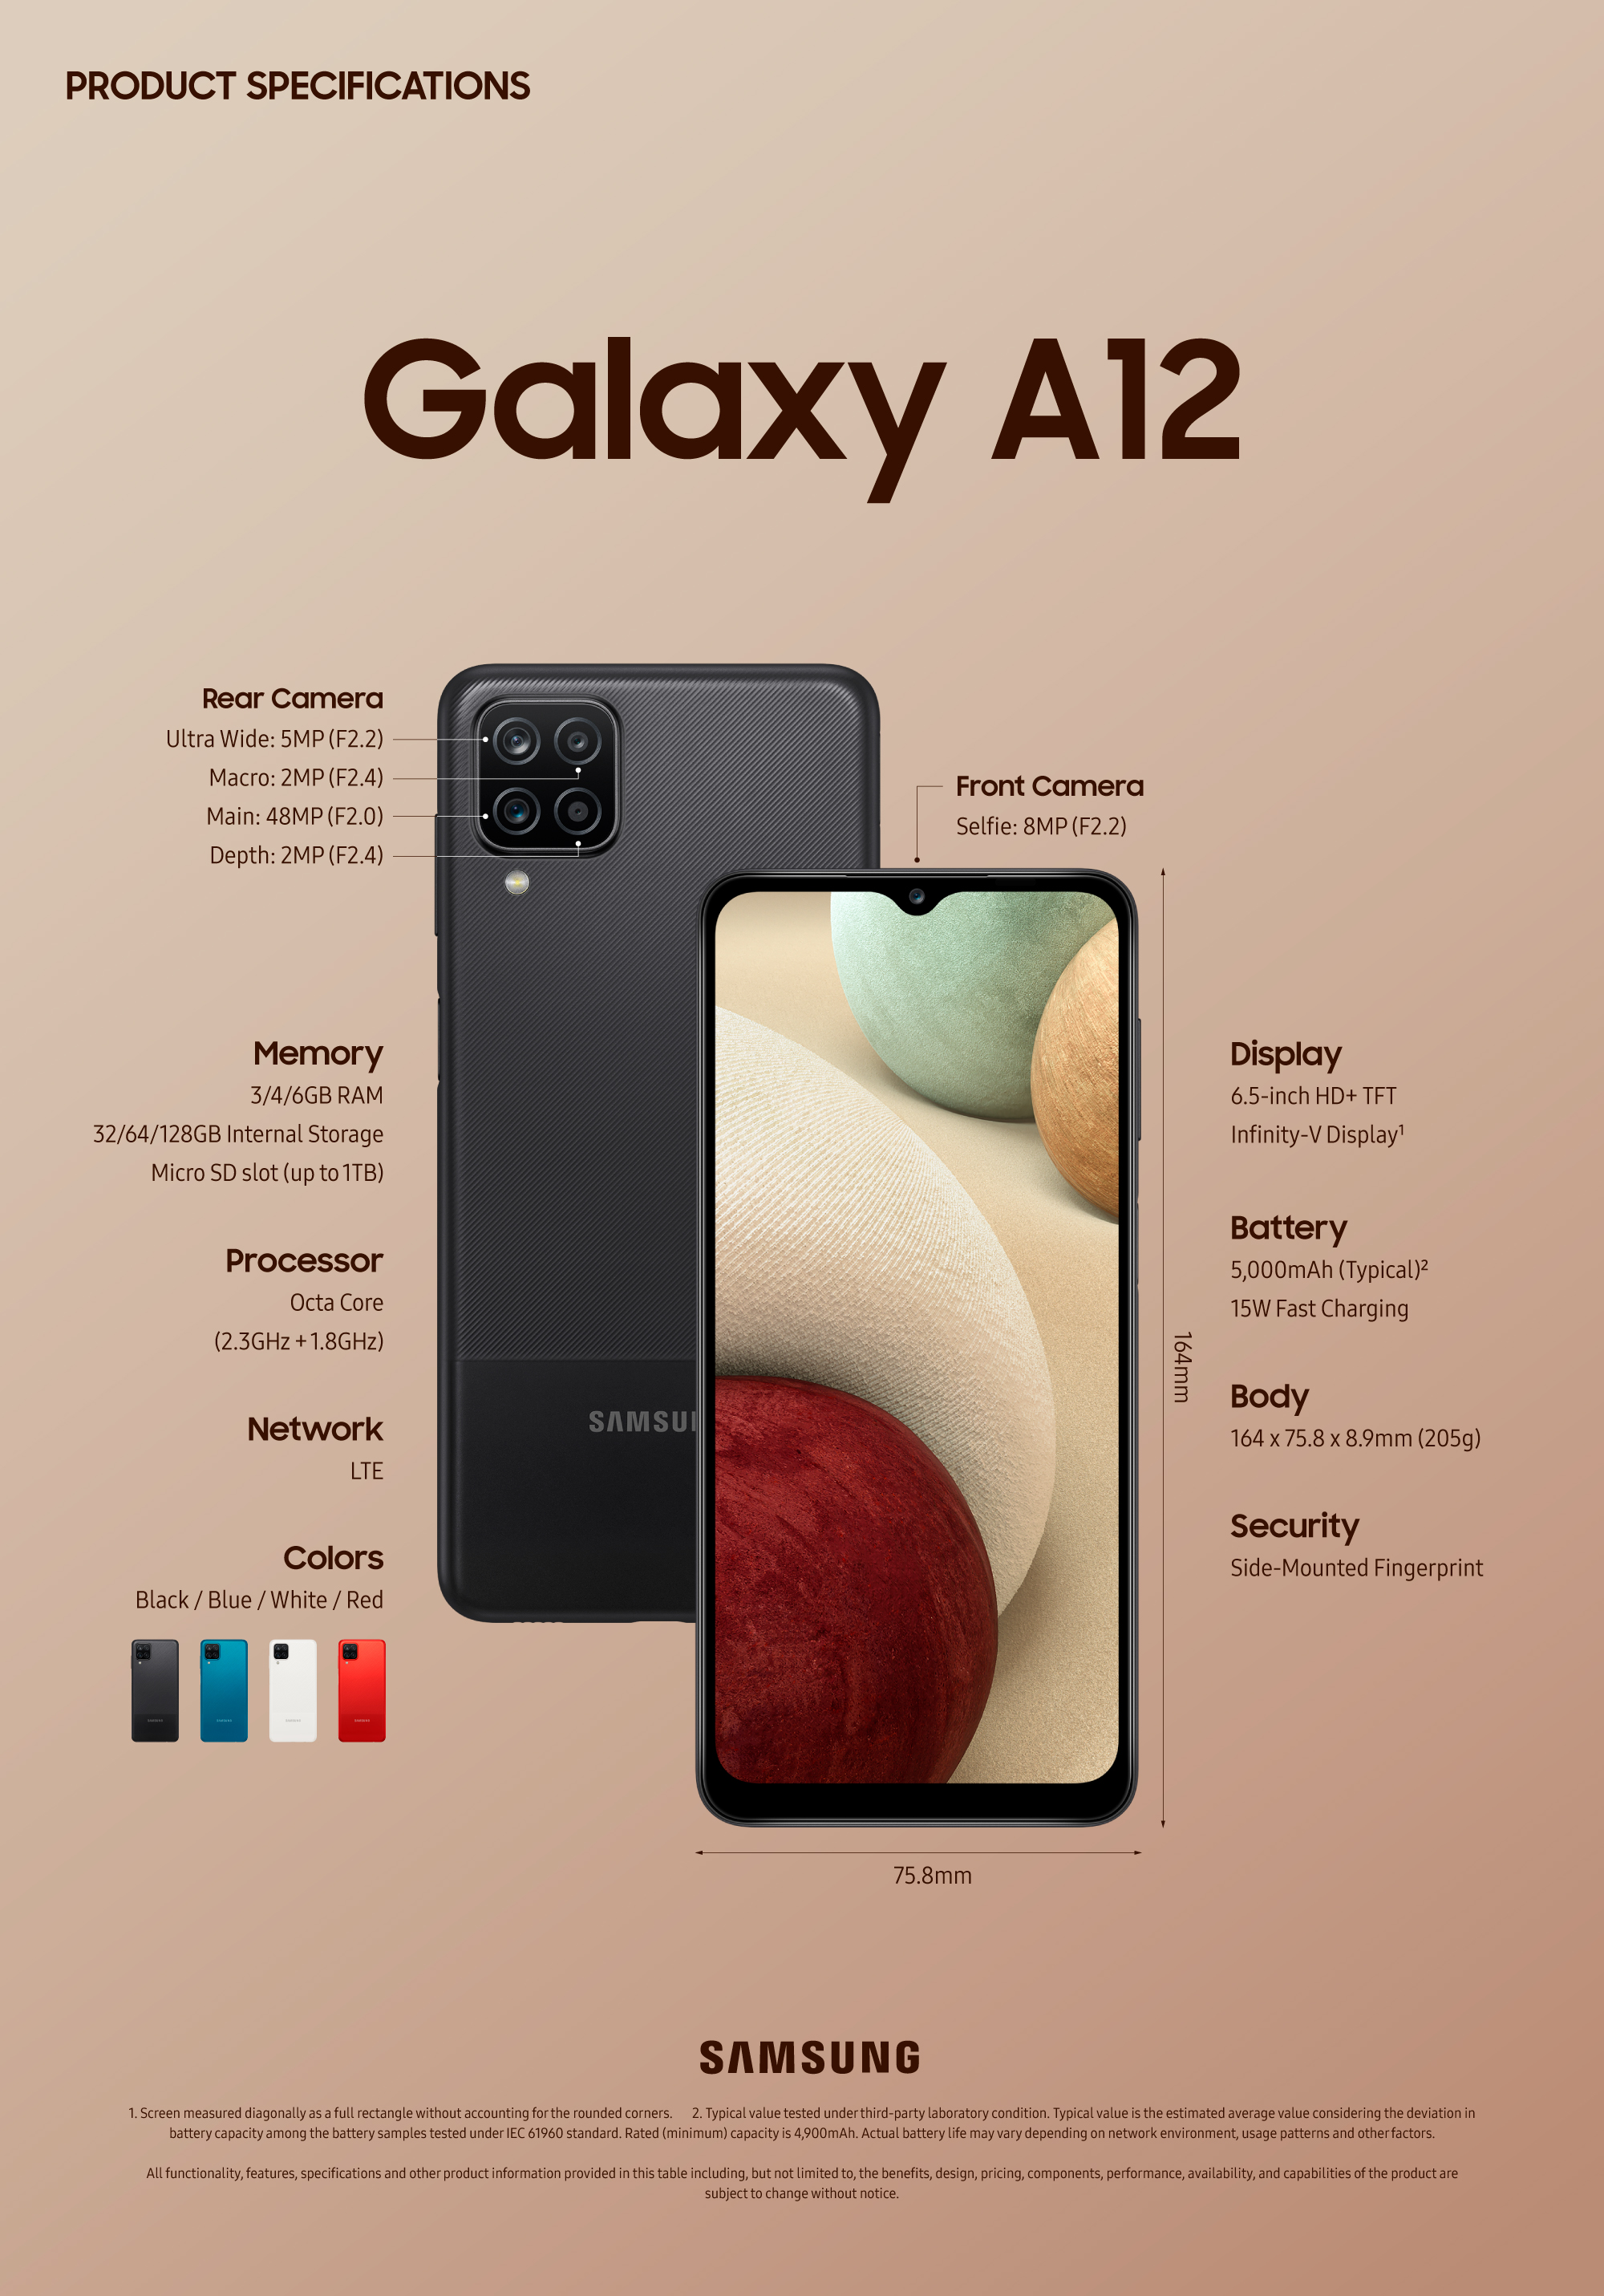 [Specs] Galaxy A12 Combines Samsung’s Essential Features in a Versatile